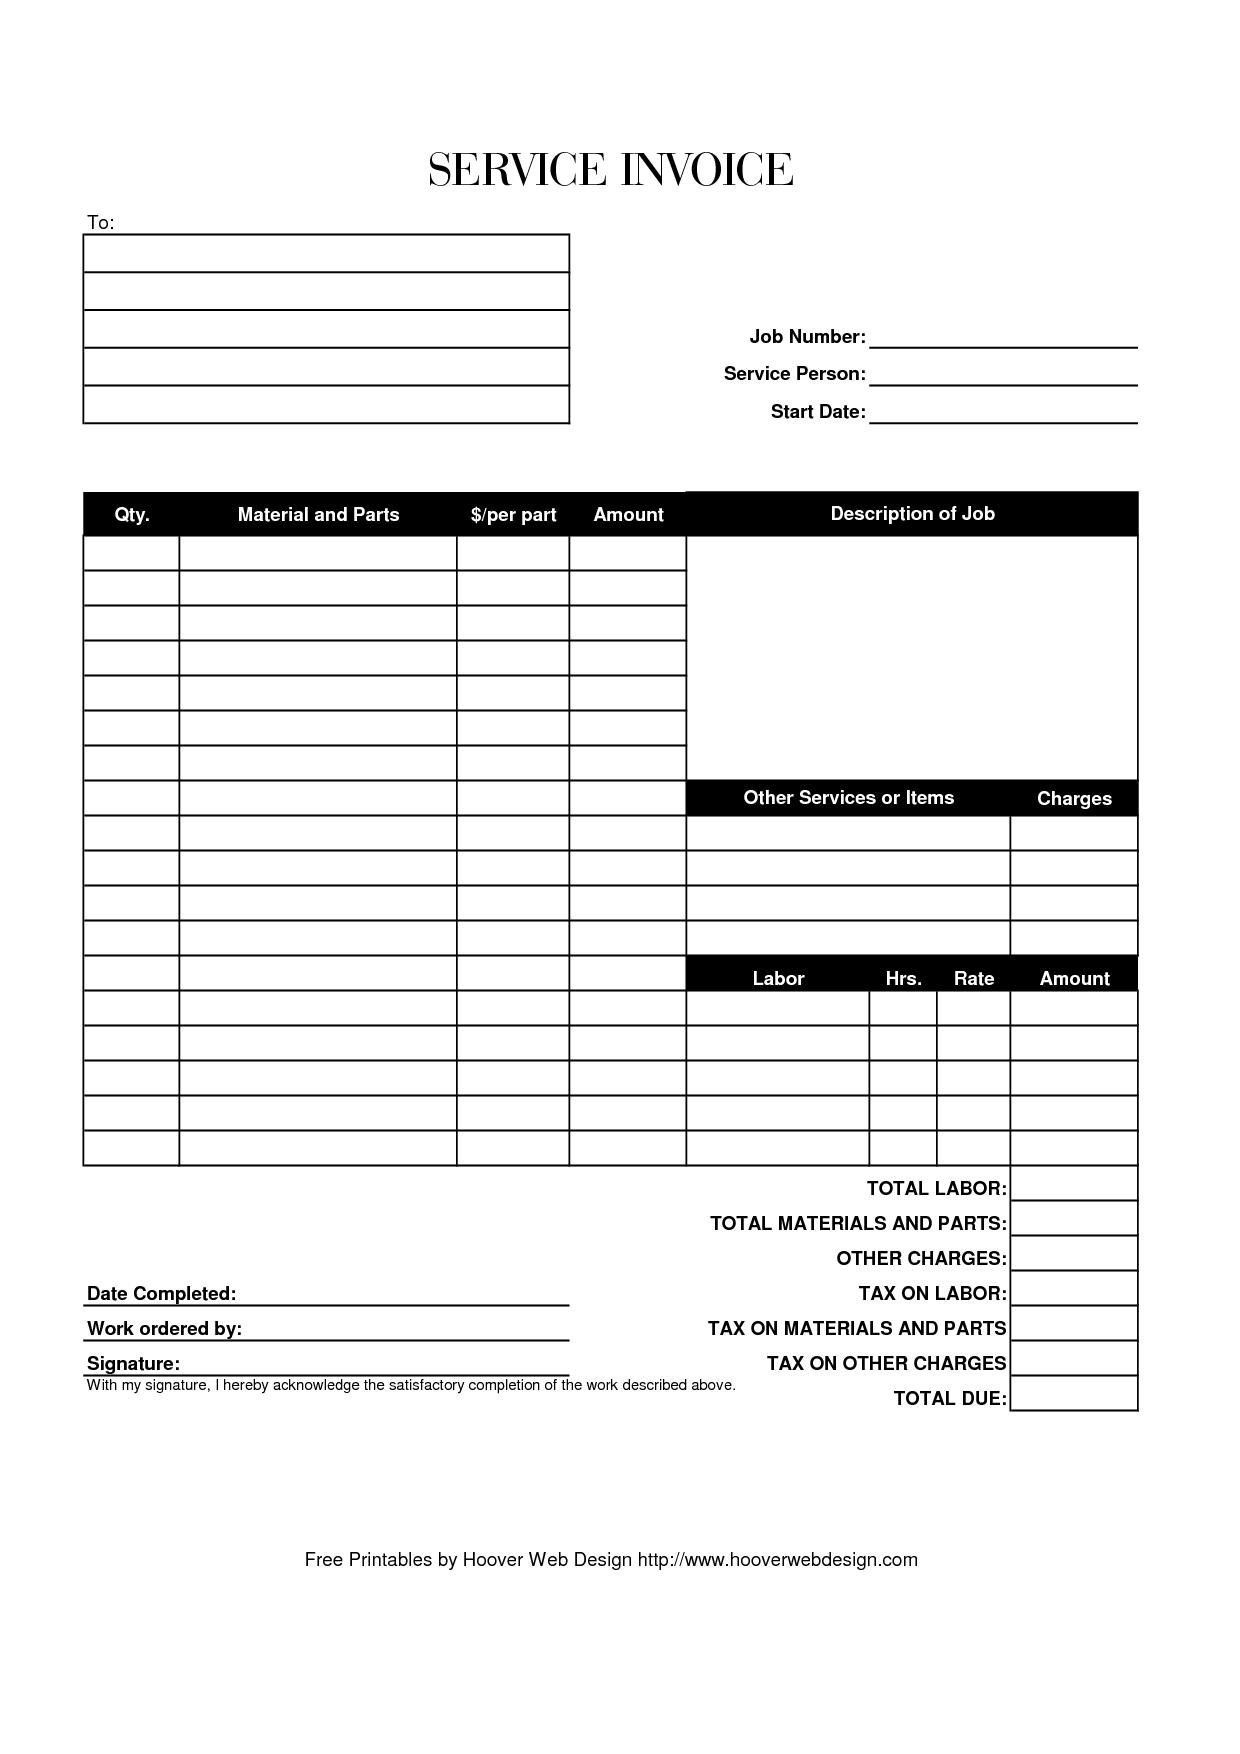 blank service invoice blank invoice sample invoices for services